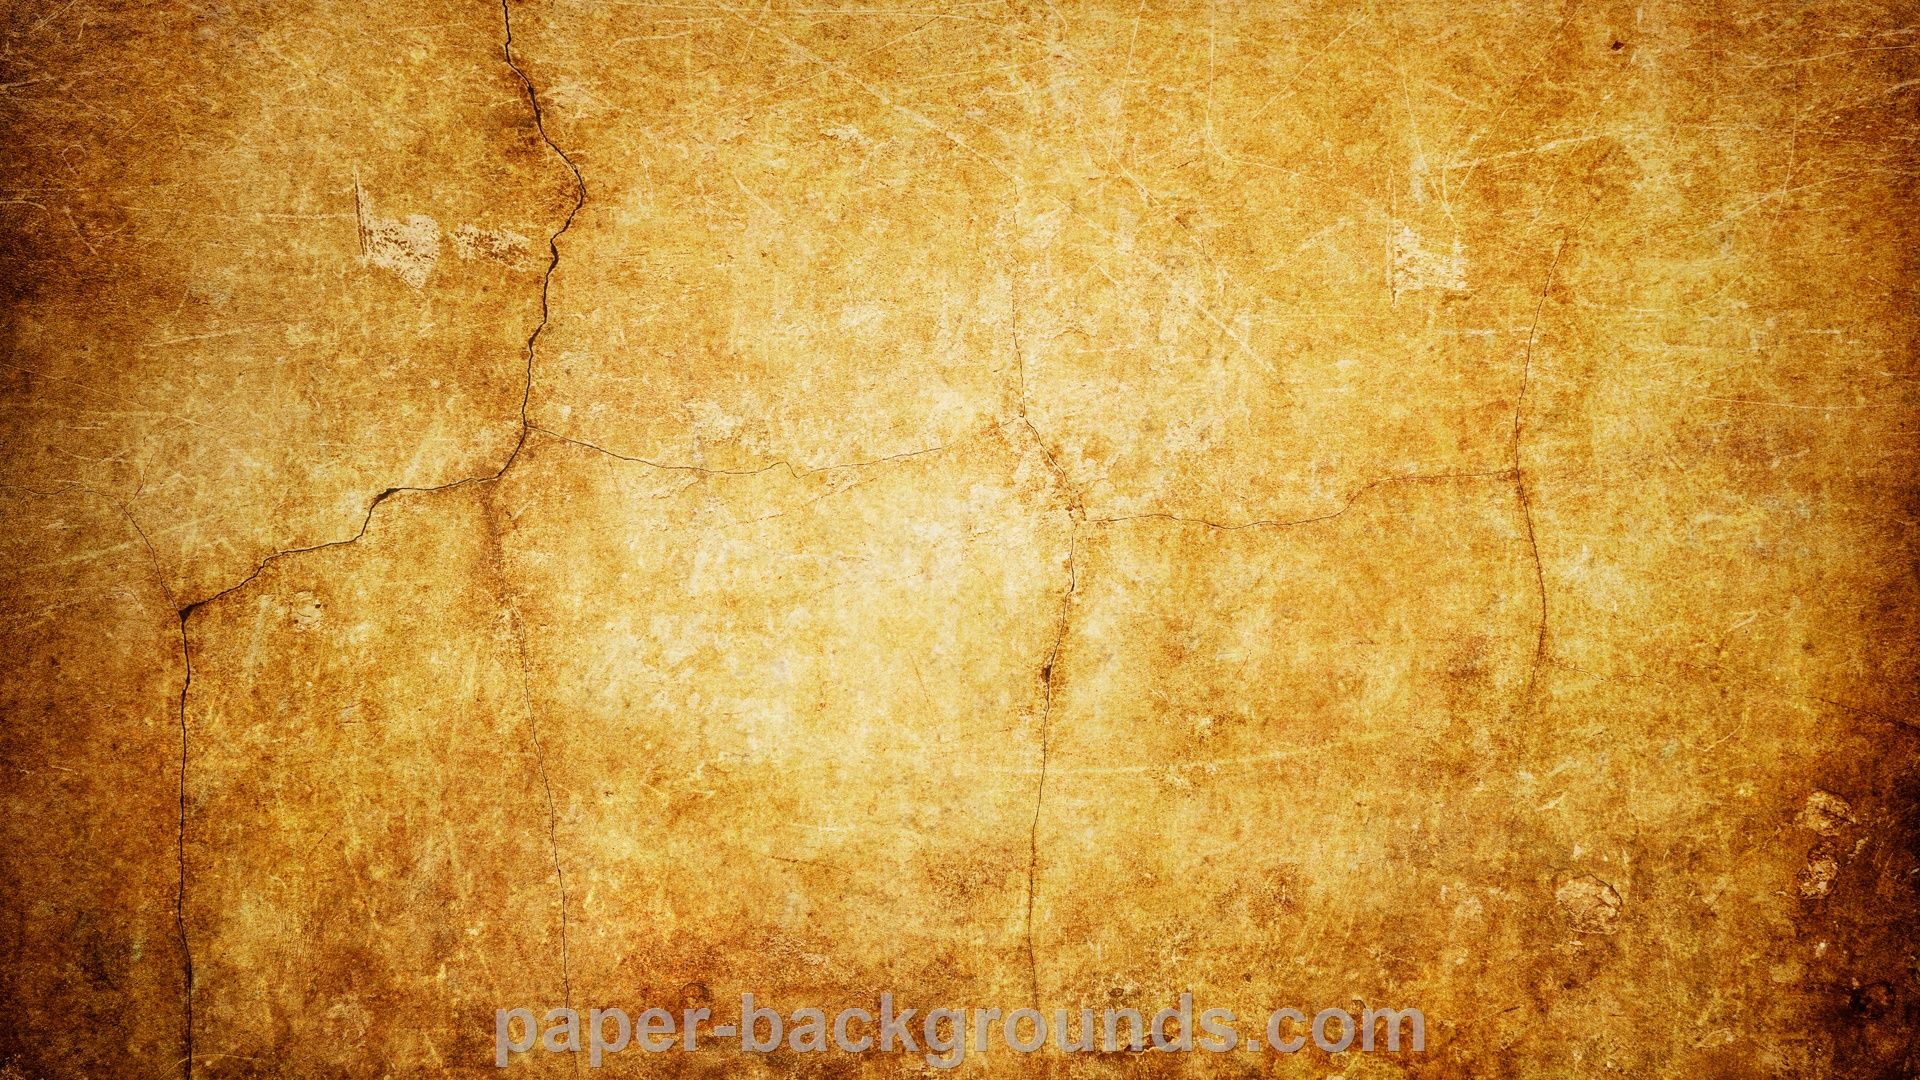 Background Wallpaper vintage wall texture background hd Paper